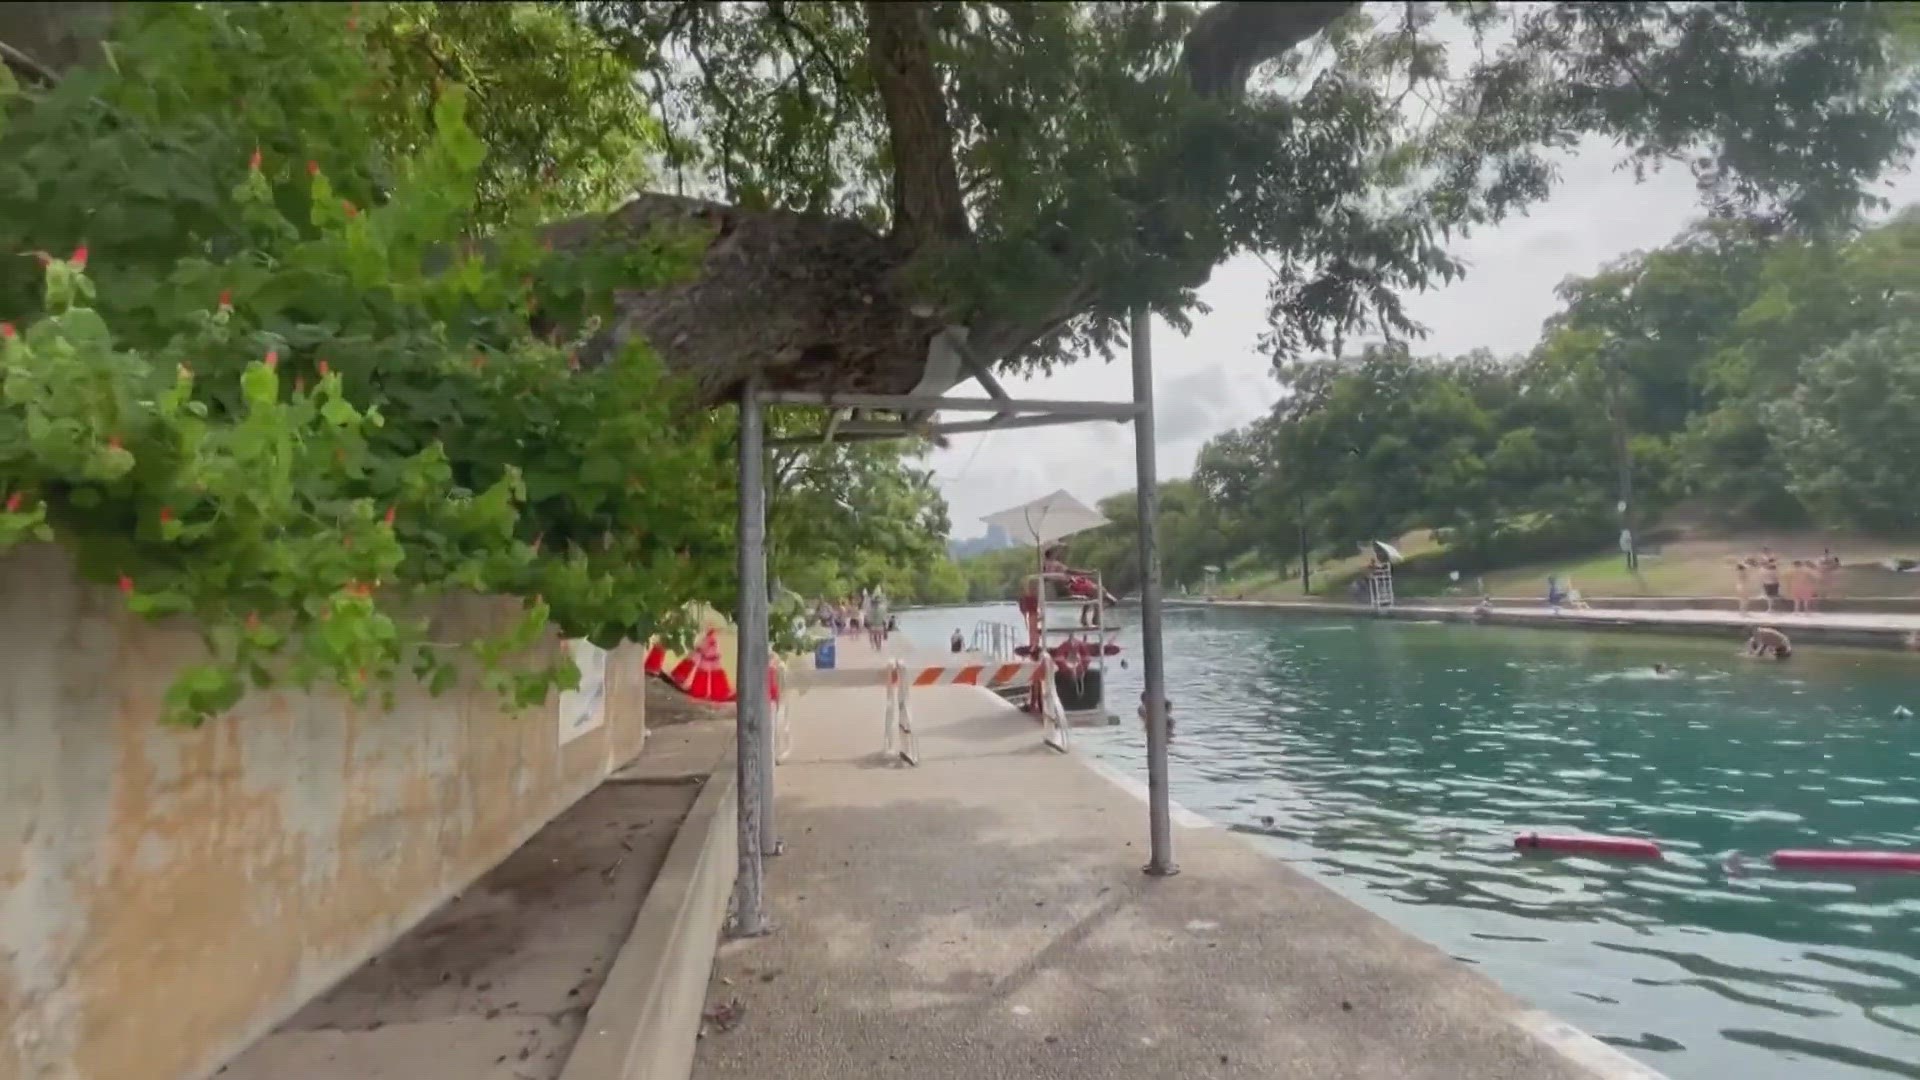 The city plans to remove a 100-year-old pecan tree from Barton Springs Pool.